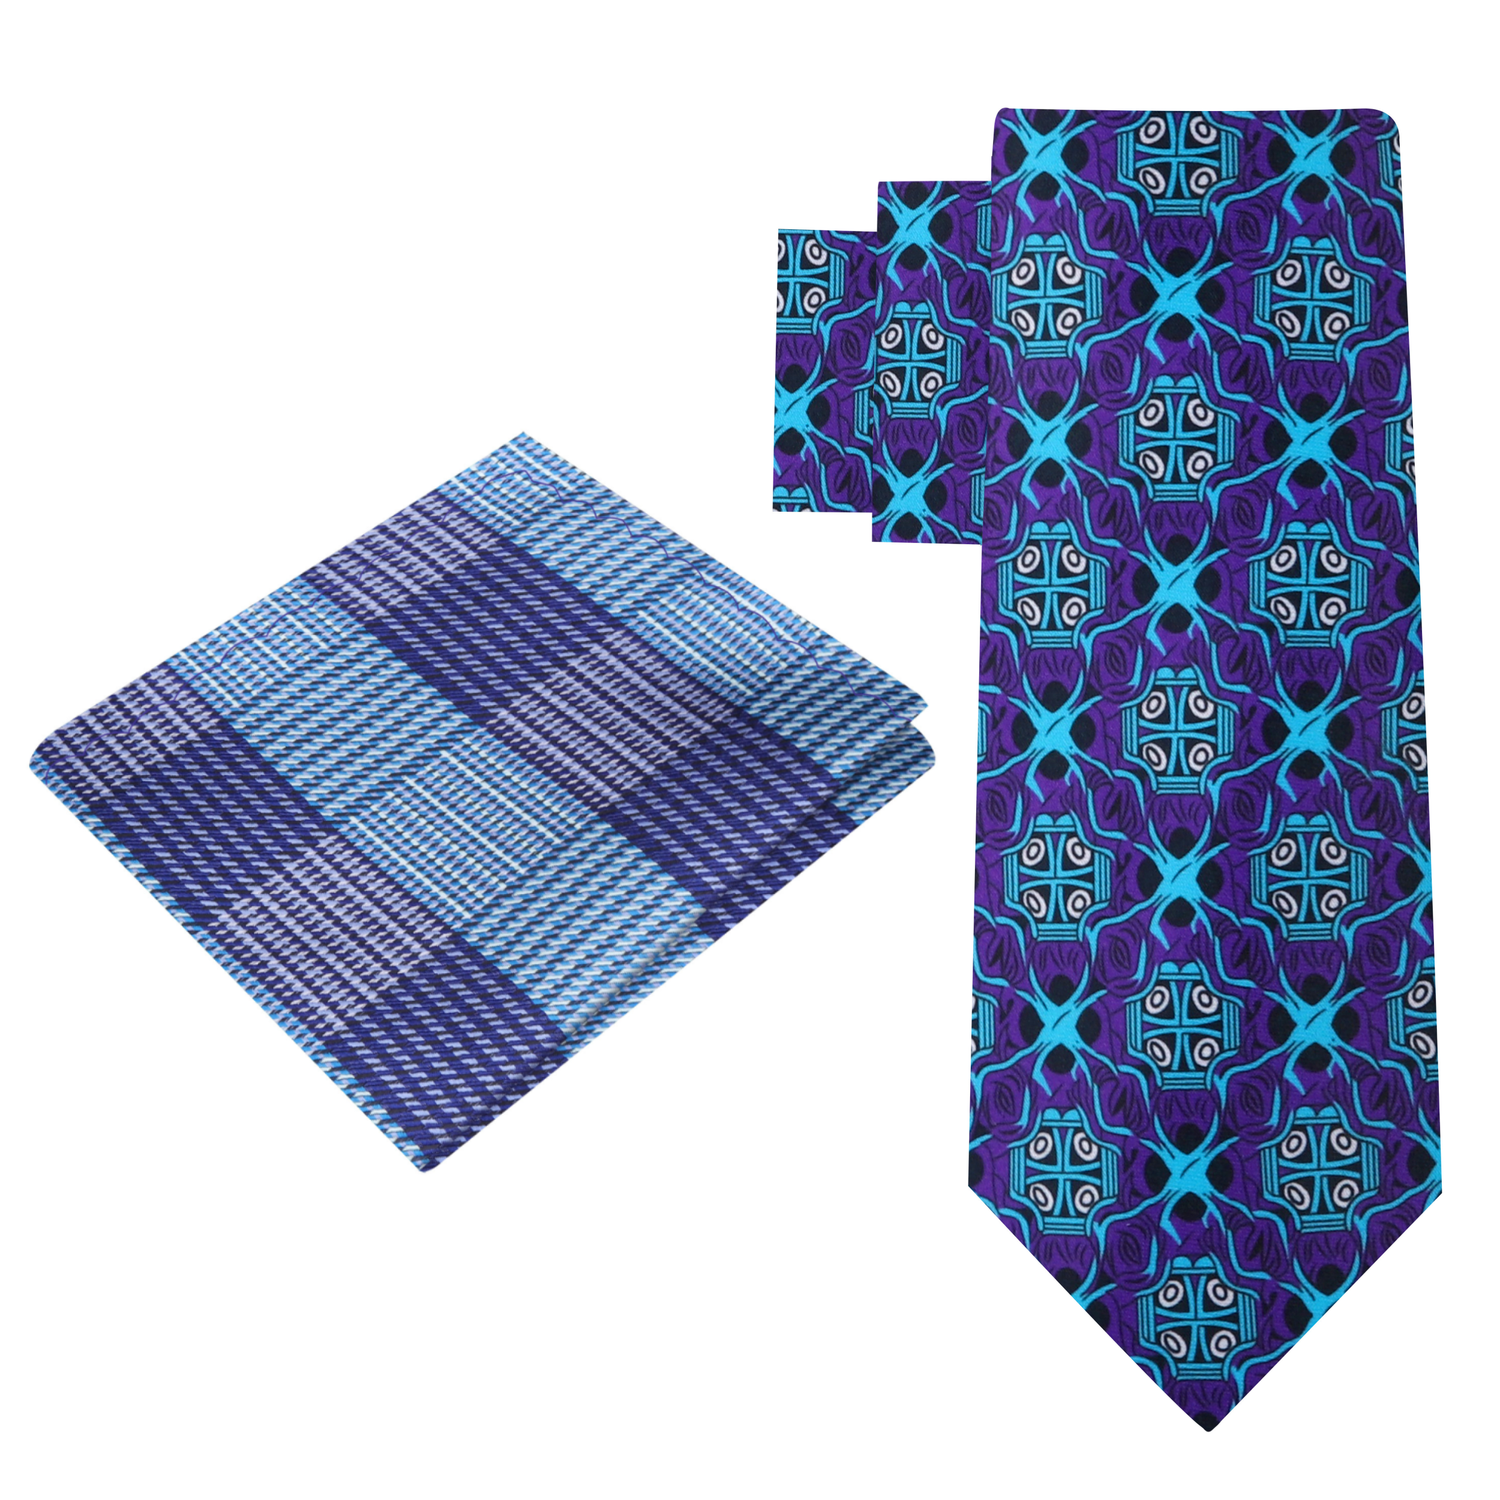 Alt View: Purple and Light Blue Abstract Necktie and Blue and Purple Plaid Pocket Square